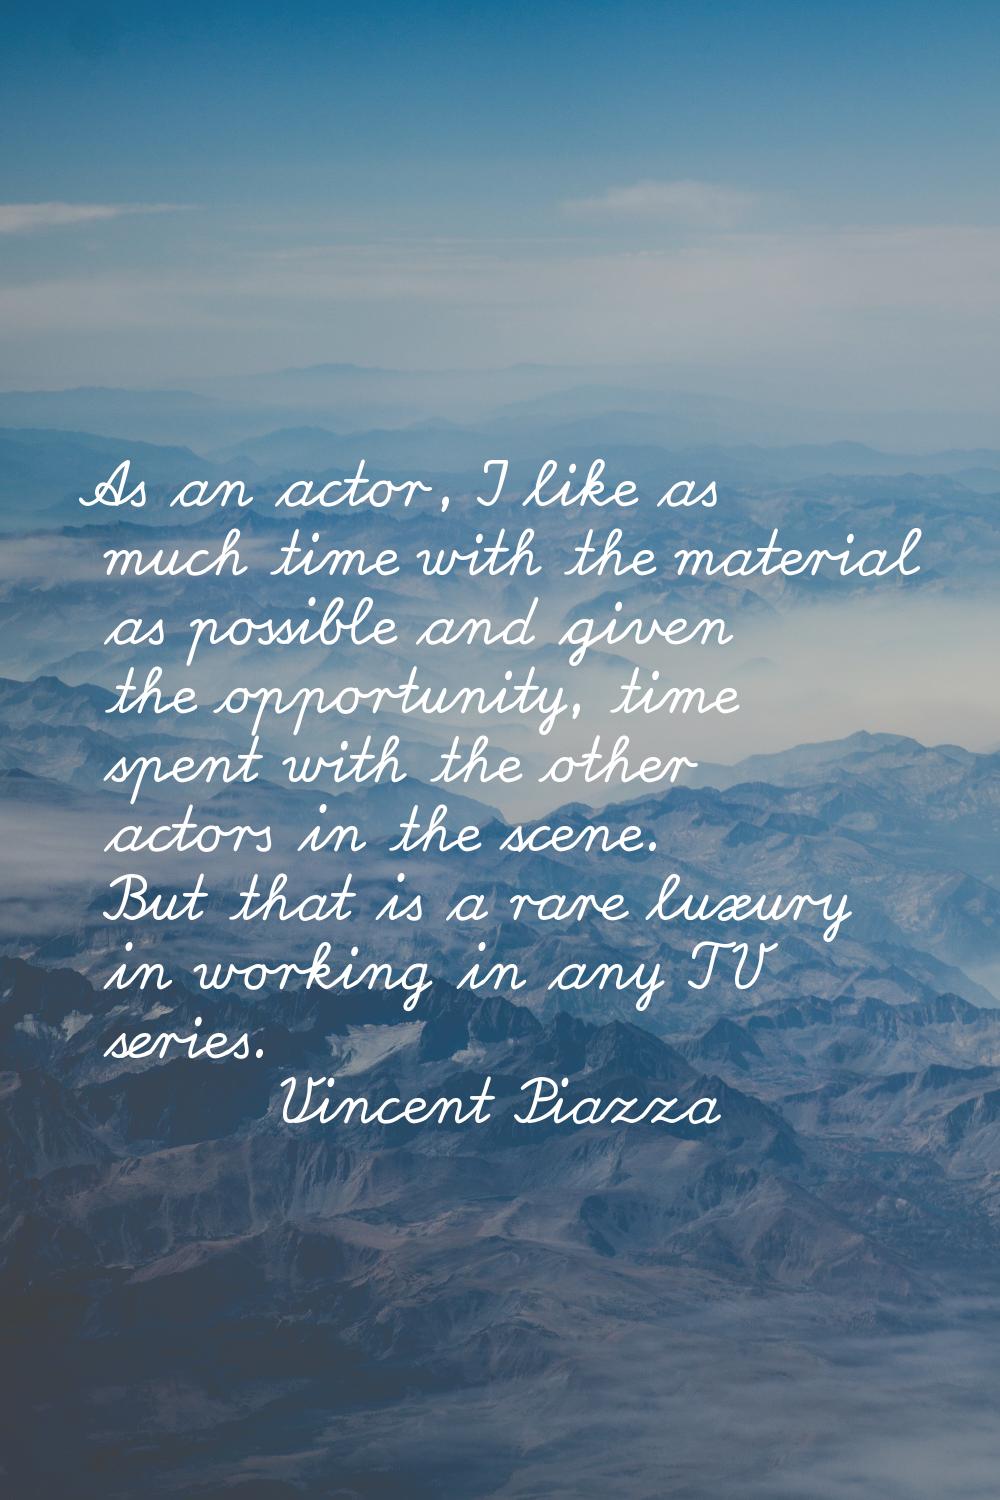 As an actor, I like as much time with the material as possible and given the opportunity, time spen